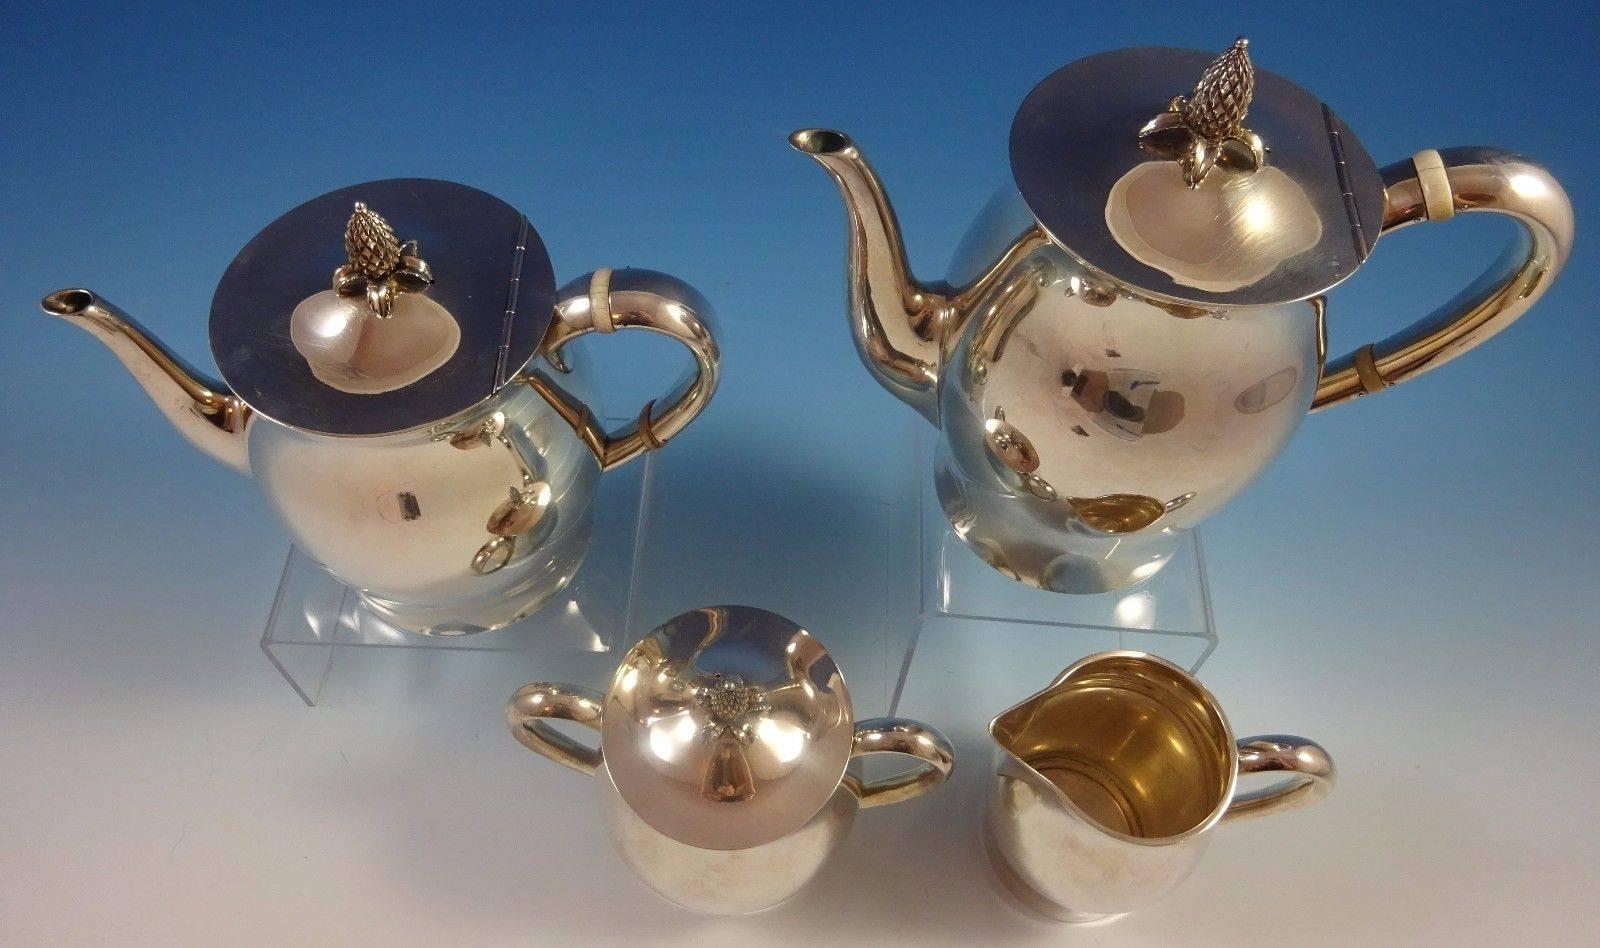 Paul revere by Tuttle sterling silver four-piece tea set #390. Made in Harry Truman's first term 1945-1949. This set includes:

One tea pot: weighs 19.25 ozt., and it measures 7" x 7 1/2". 

One coffee pot: weighs 20.67 ozt., and it